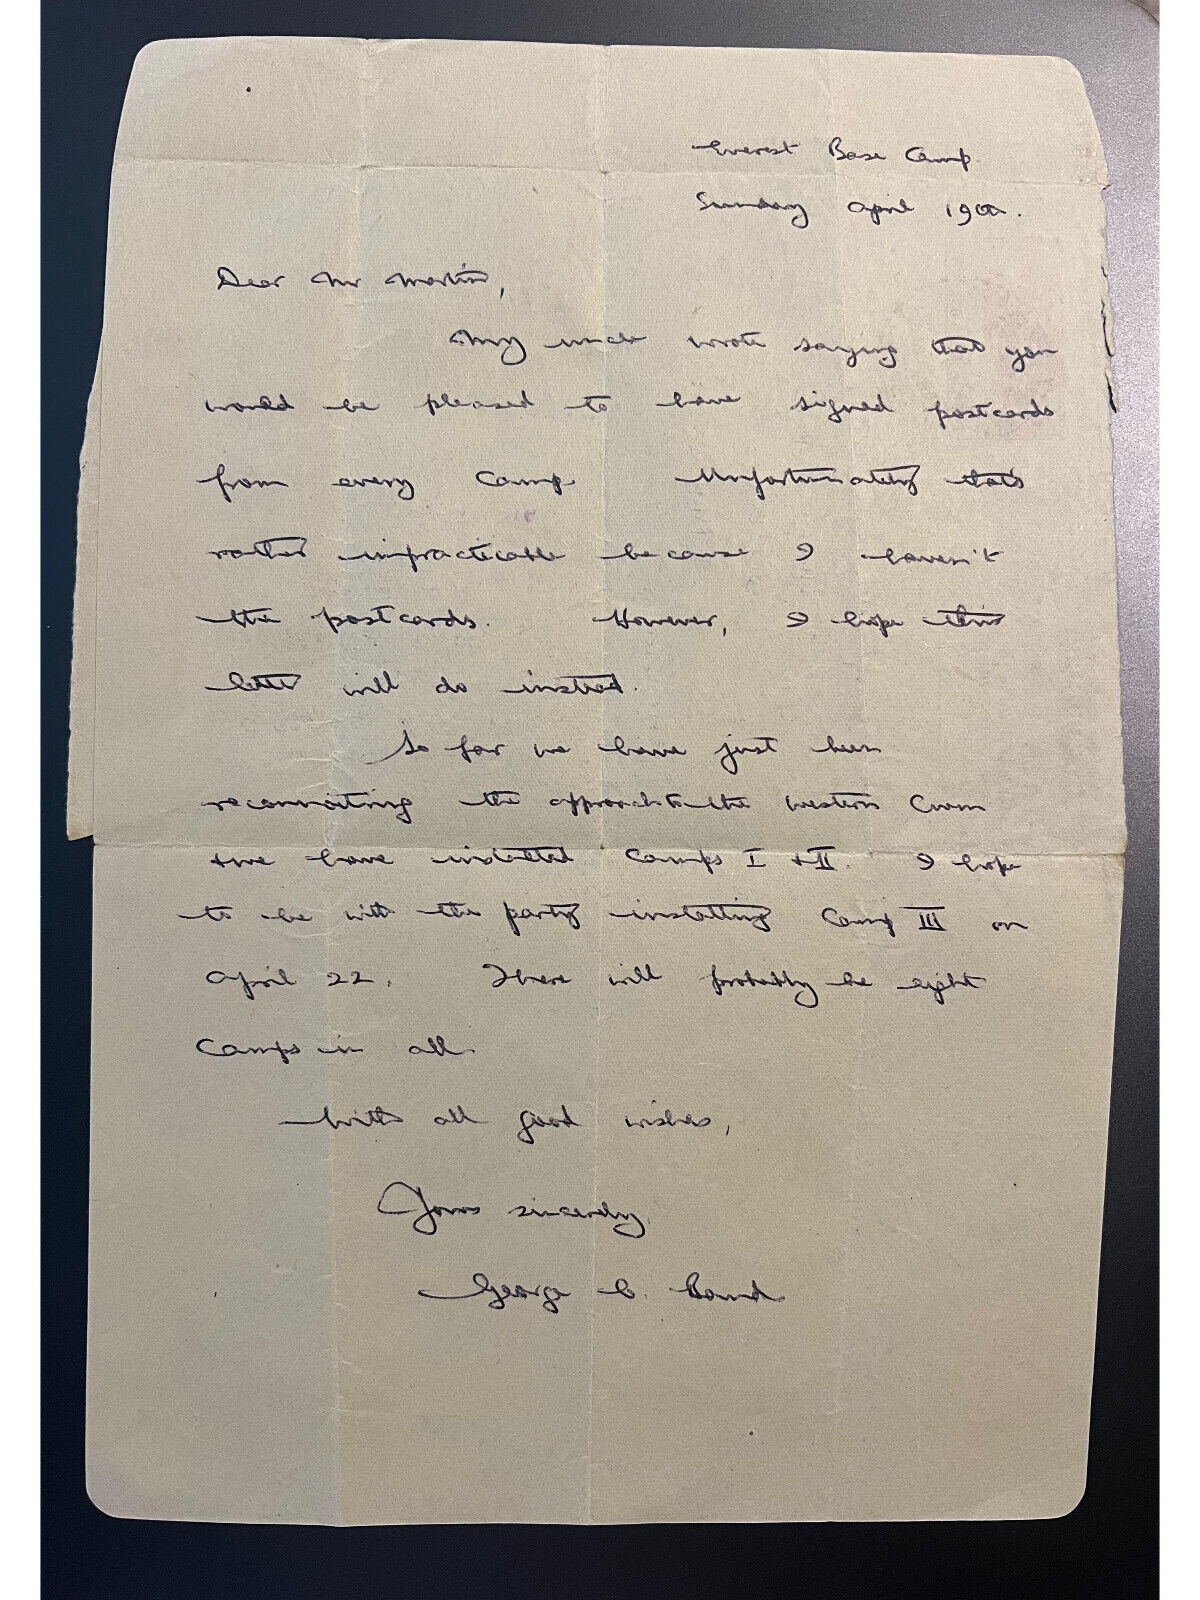 George Band 1953 Autograph Letter Signed - From Mount Everest Base Camp